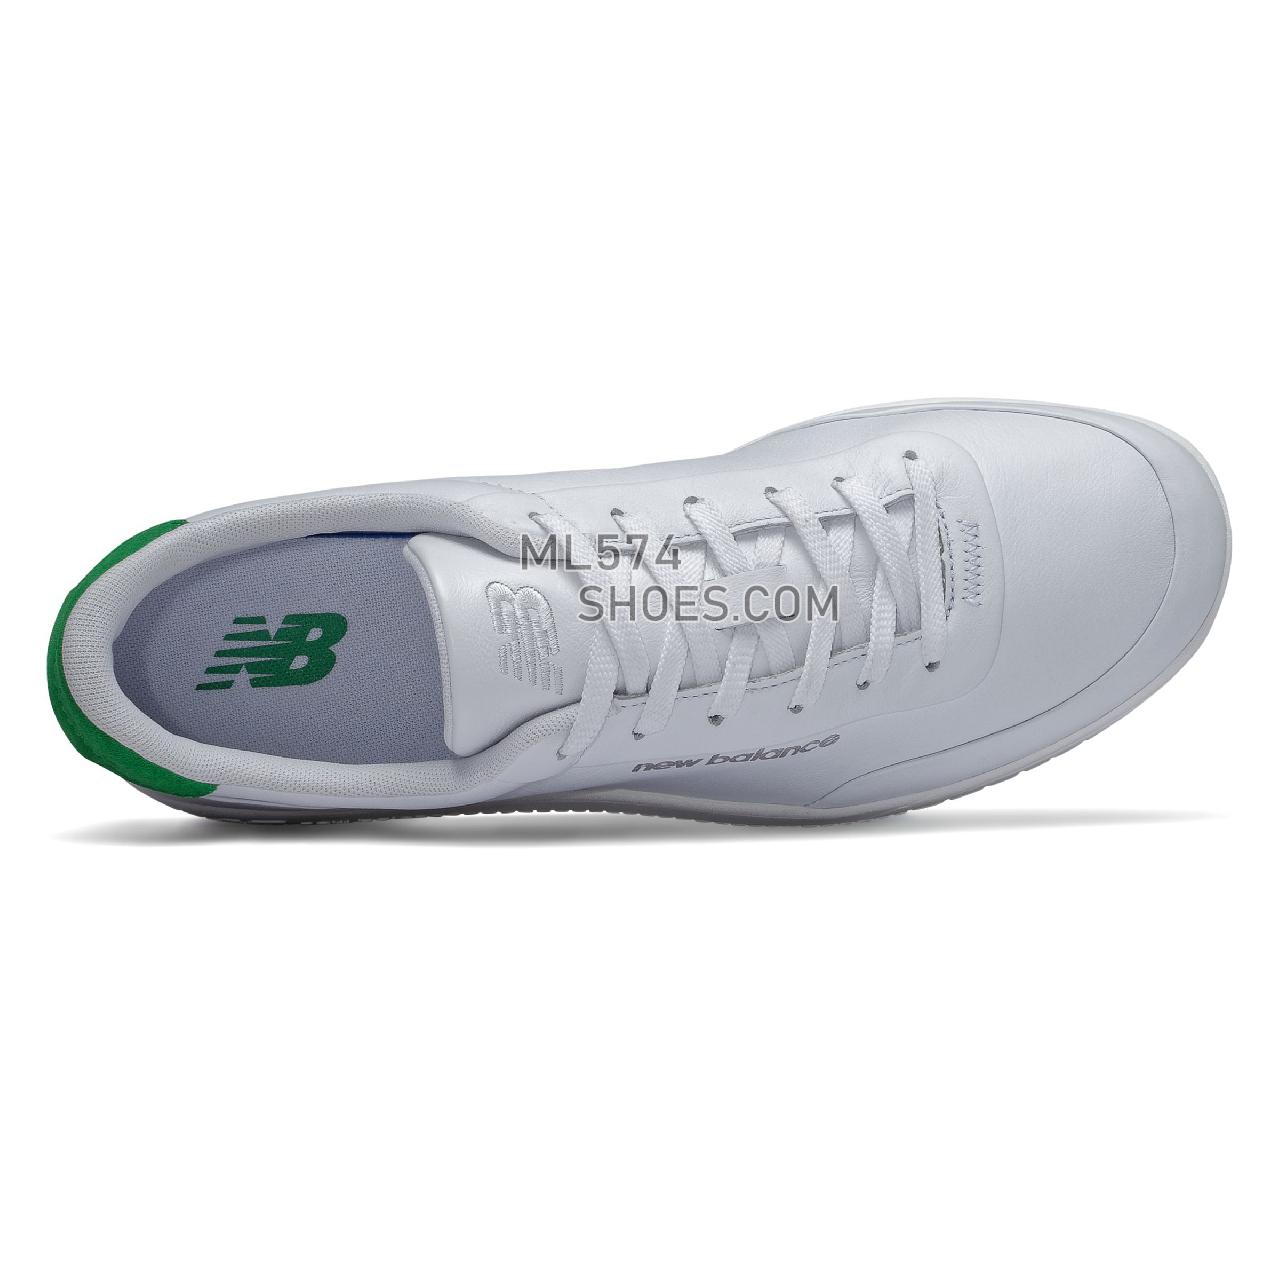 New Balance CT Alley - Men's Classic Sneakers - White with Green - CTALYMAB